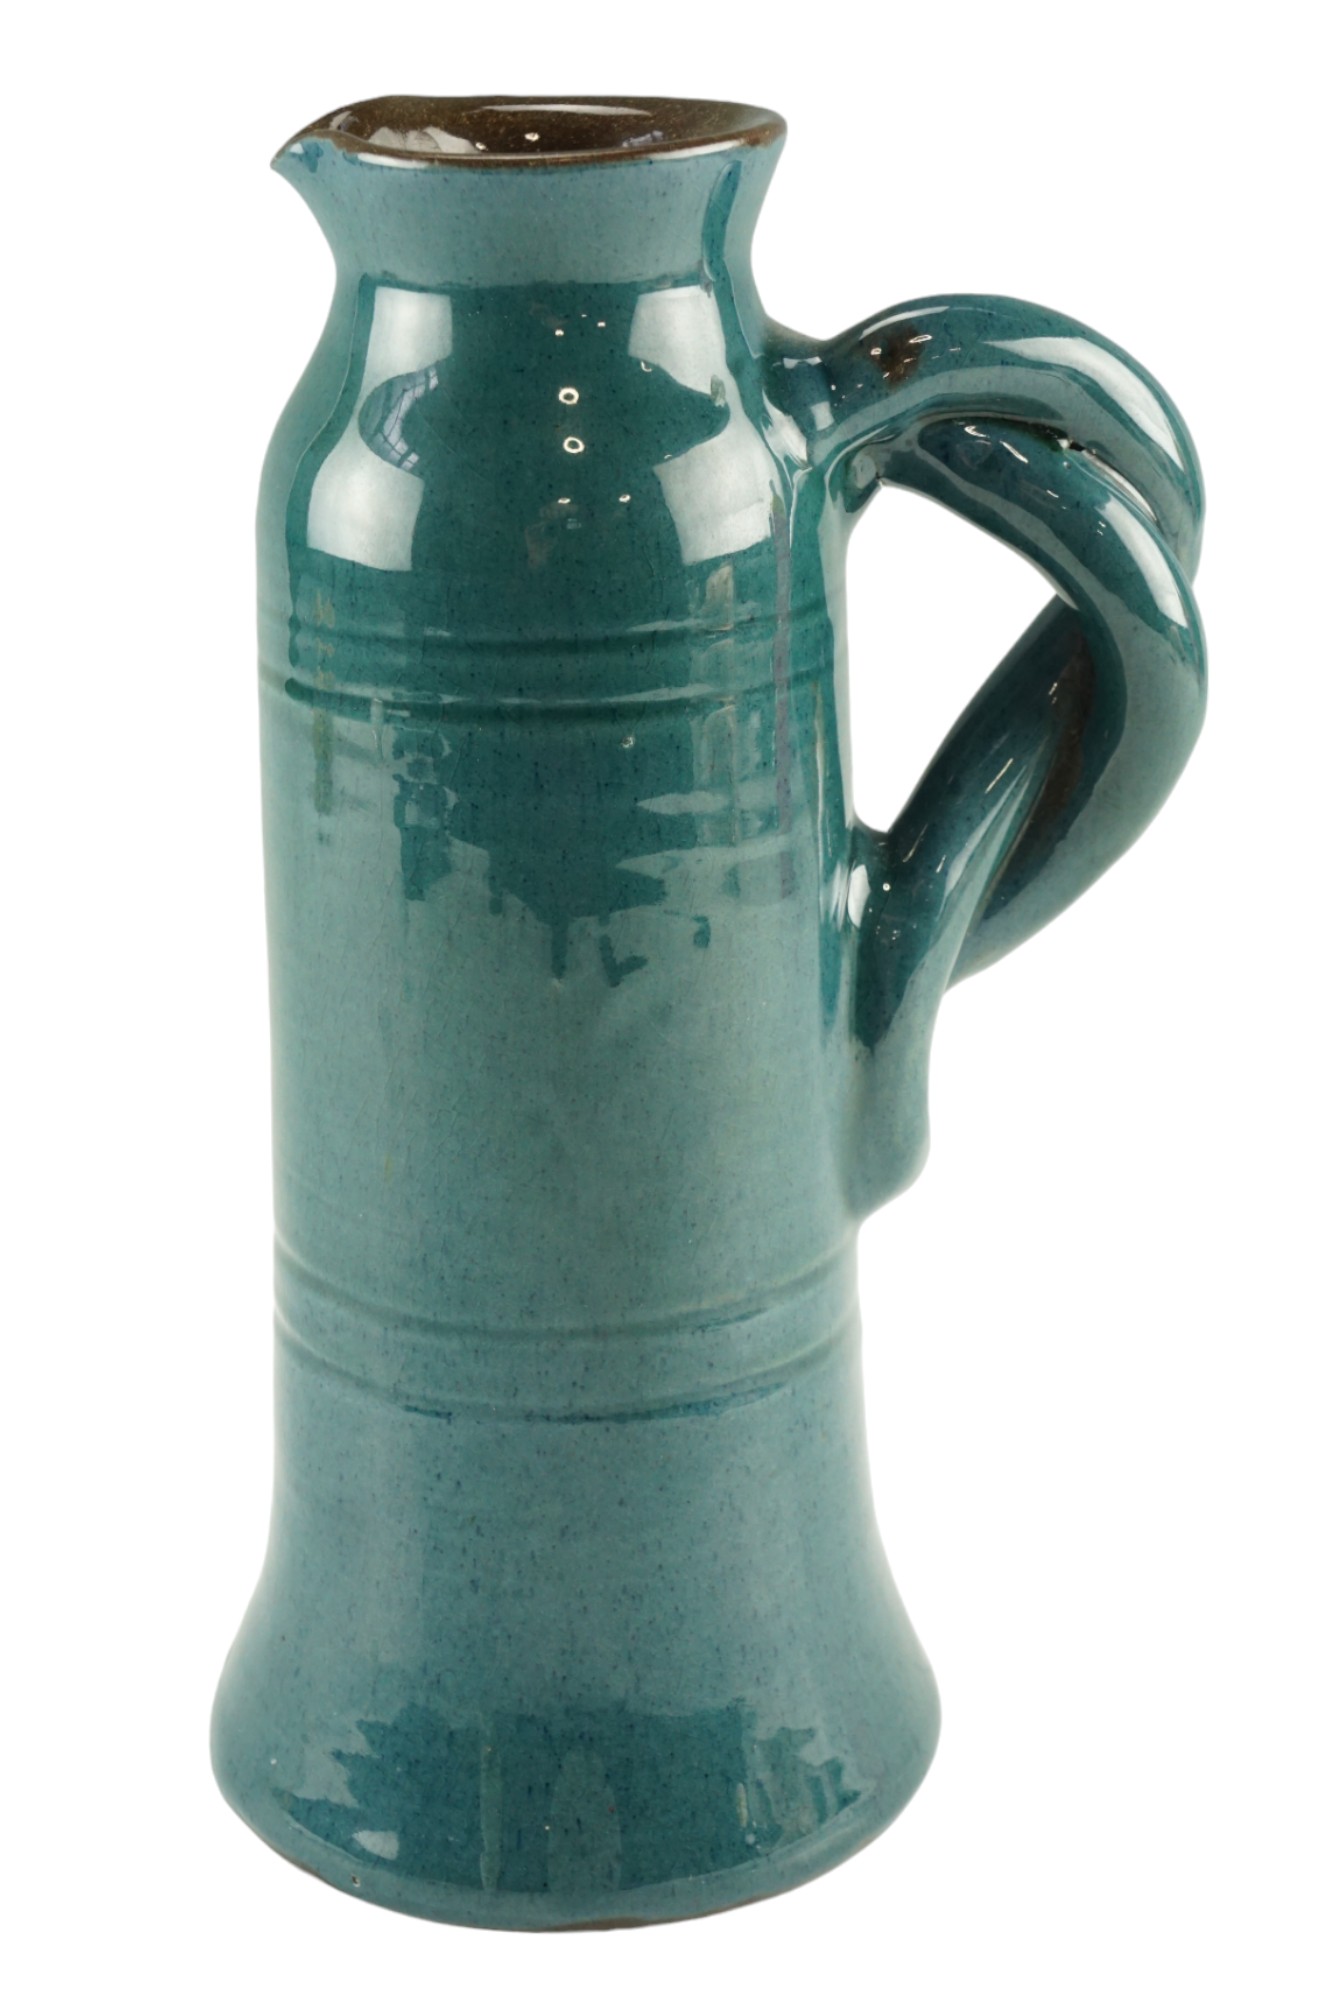 An early 20th Century Schofield of Wetheriggs, Penrith glazed earthenware jug of slender elongated